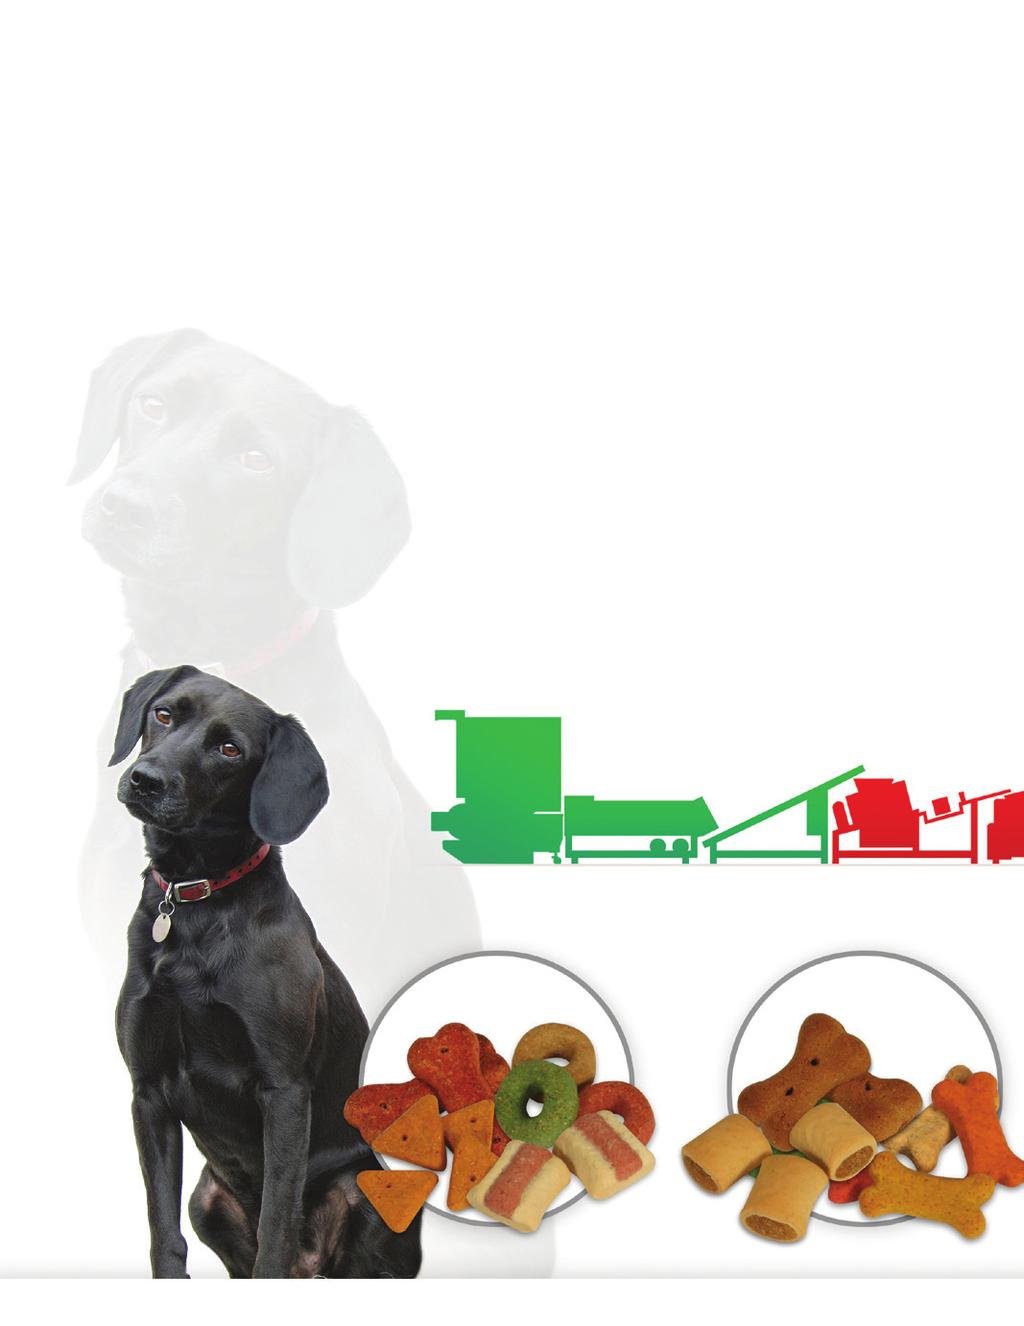 Complete solutions for baked pet treats At Baker Perkins we specialize in the design, manufacture and commissioning of Baked Pet Treat production lines.